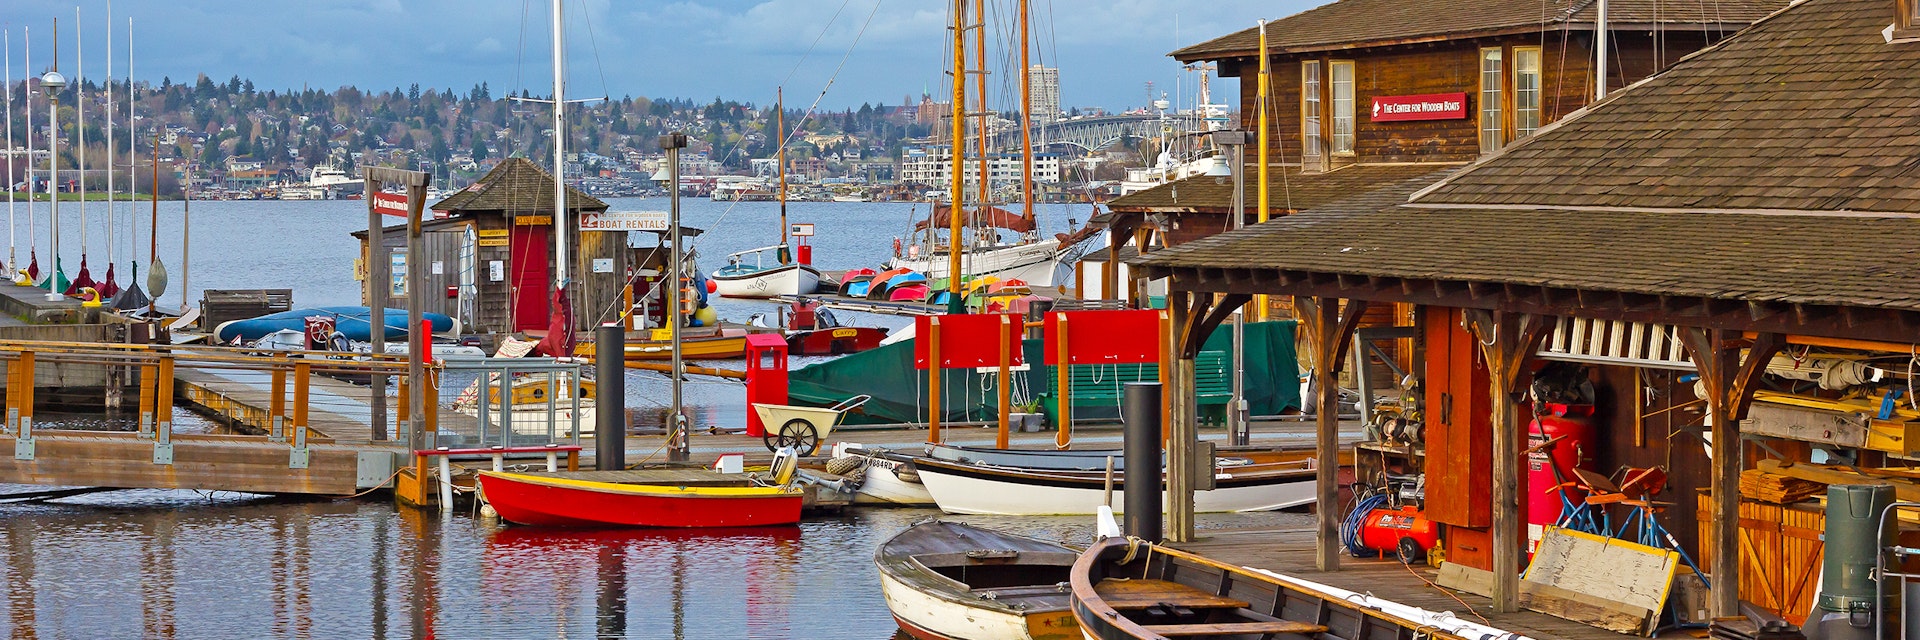 SEATTLE, USA - MARCH 22, 2016: Center for Wooden Boats on Lake Union on March 22, 2016 in Seattle, WA, USA. Various boats are available for rent to paddle on the Lake Union.; Shutterstock ID 430690528; Your name (First / Last): Alexander Howard; GL account no.: 65050; Netsuite department name: Online Editorial; Full Product or Project name including edition: Western USA neighborhood POI highlights